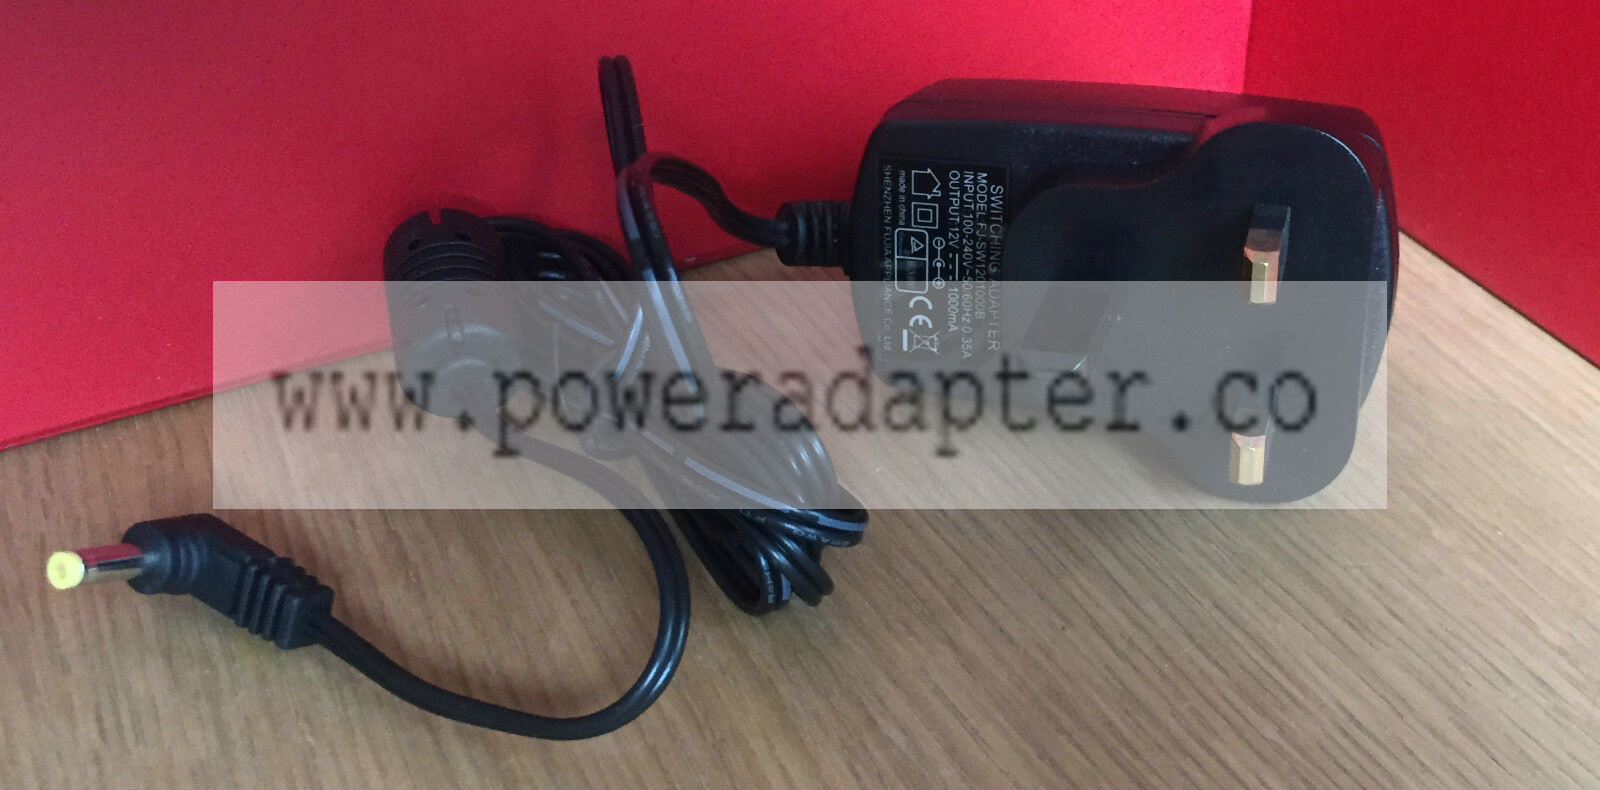 12 Volt 1Amp Power Supply Transformer Adapter PSU Universal Multi Purpose NEW Brand: Unbranded Type: AC/DC Adapter O - Click Image to Close